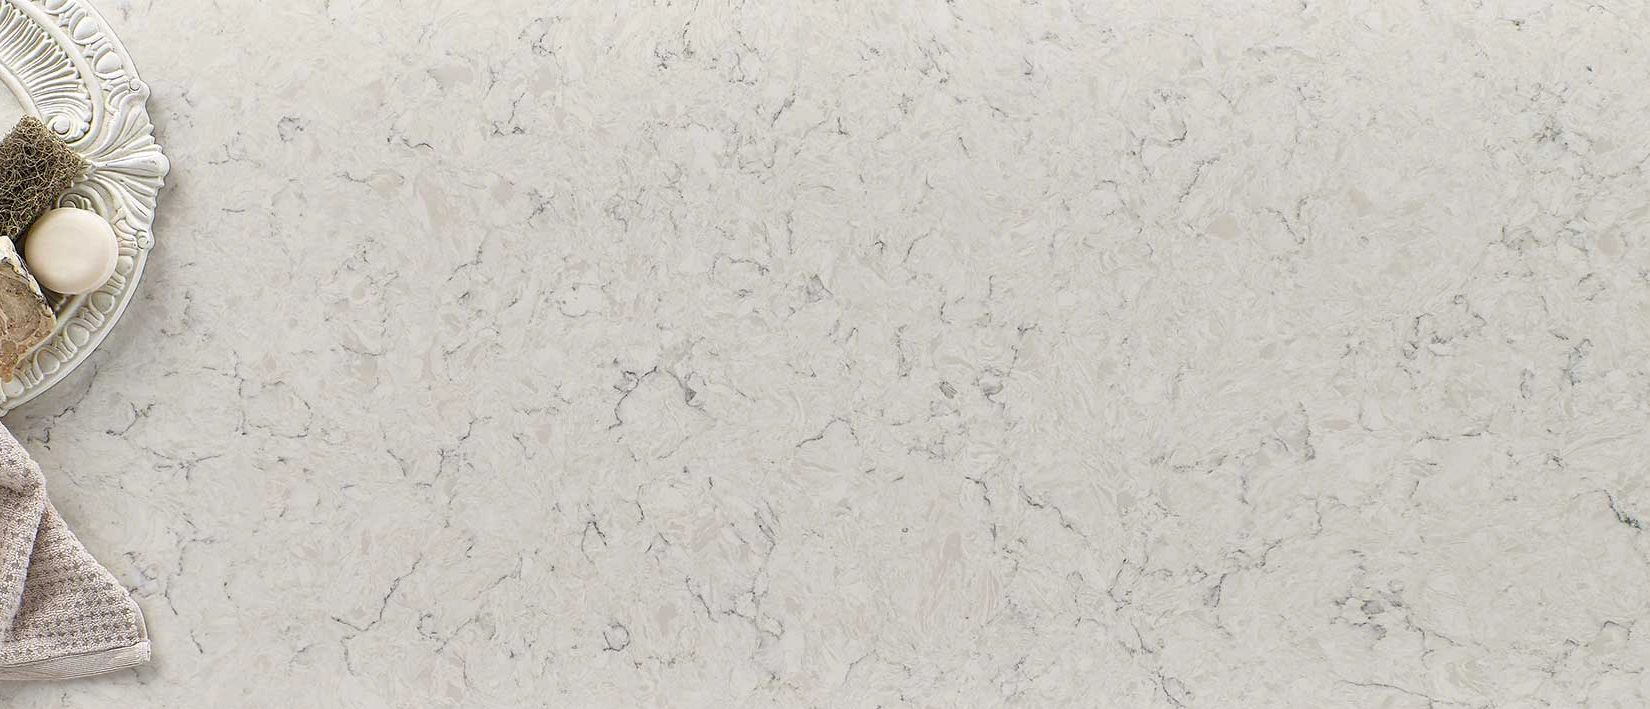 Carrara mist, creamy background highlighted with subtle specks and veins that add interest and depth